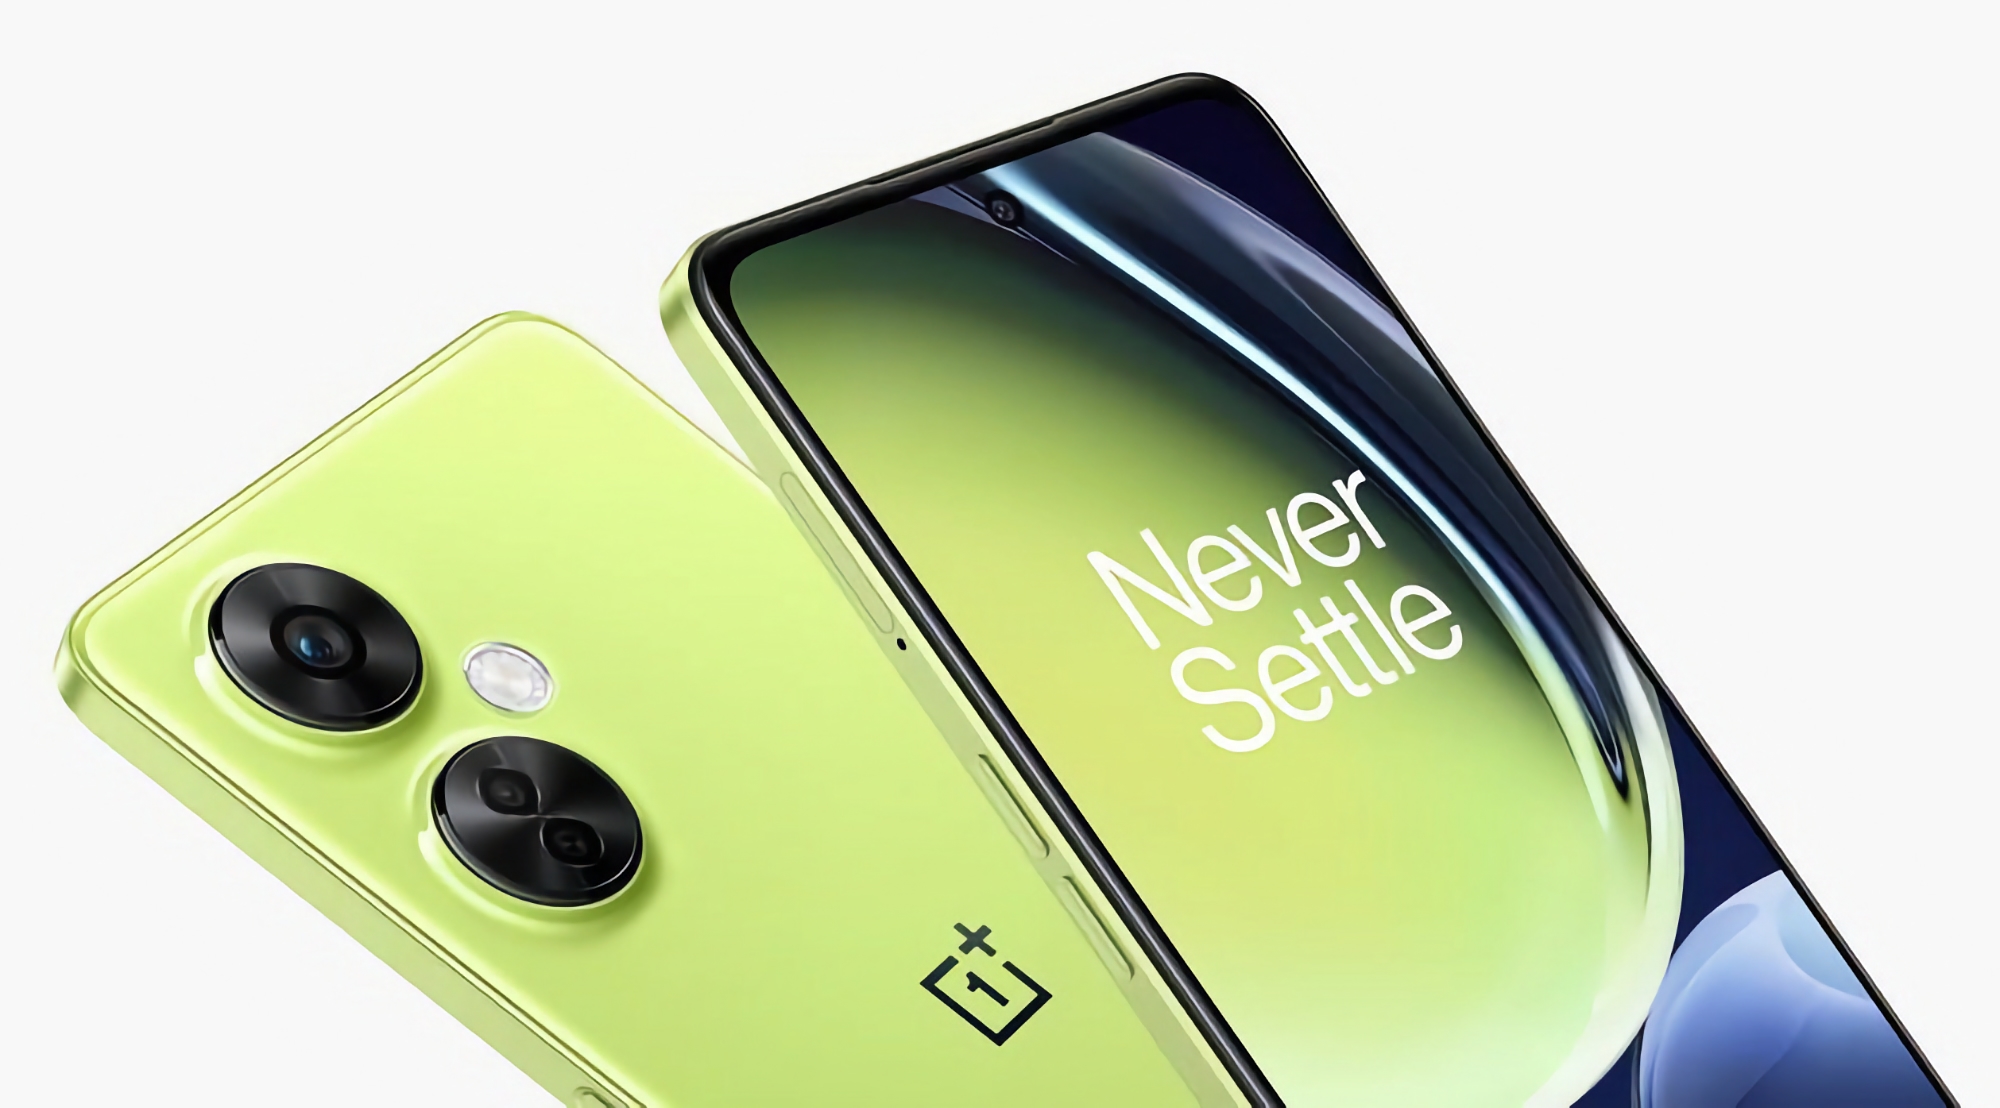 120Hz LCD display, Snapdragon 695 chip, 5000mAh battery with 67W charging and 108MP camera: Insider reveals OnePlus Nord CE 3 Lite specifications